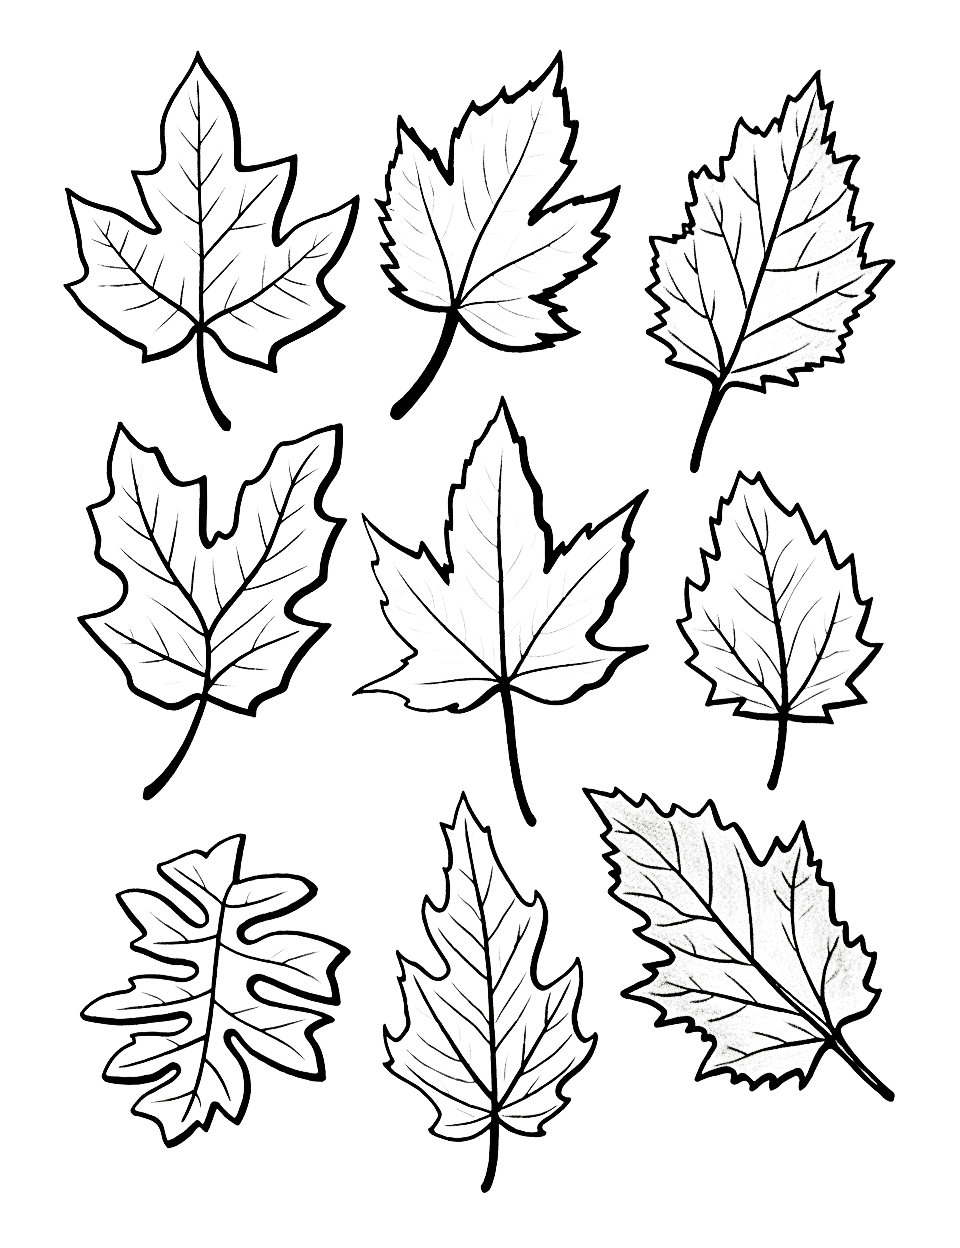 Fall Leaves Symphony Thanksgiving Coloring Page - A symphony of fall leaves in various shapes and sizes.